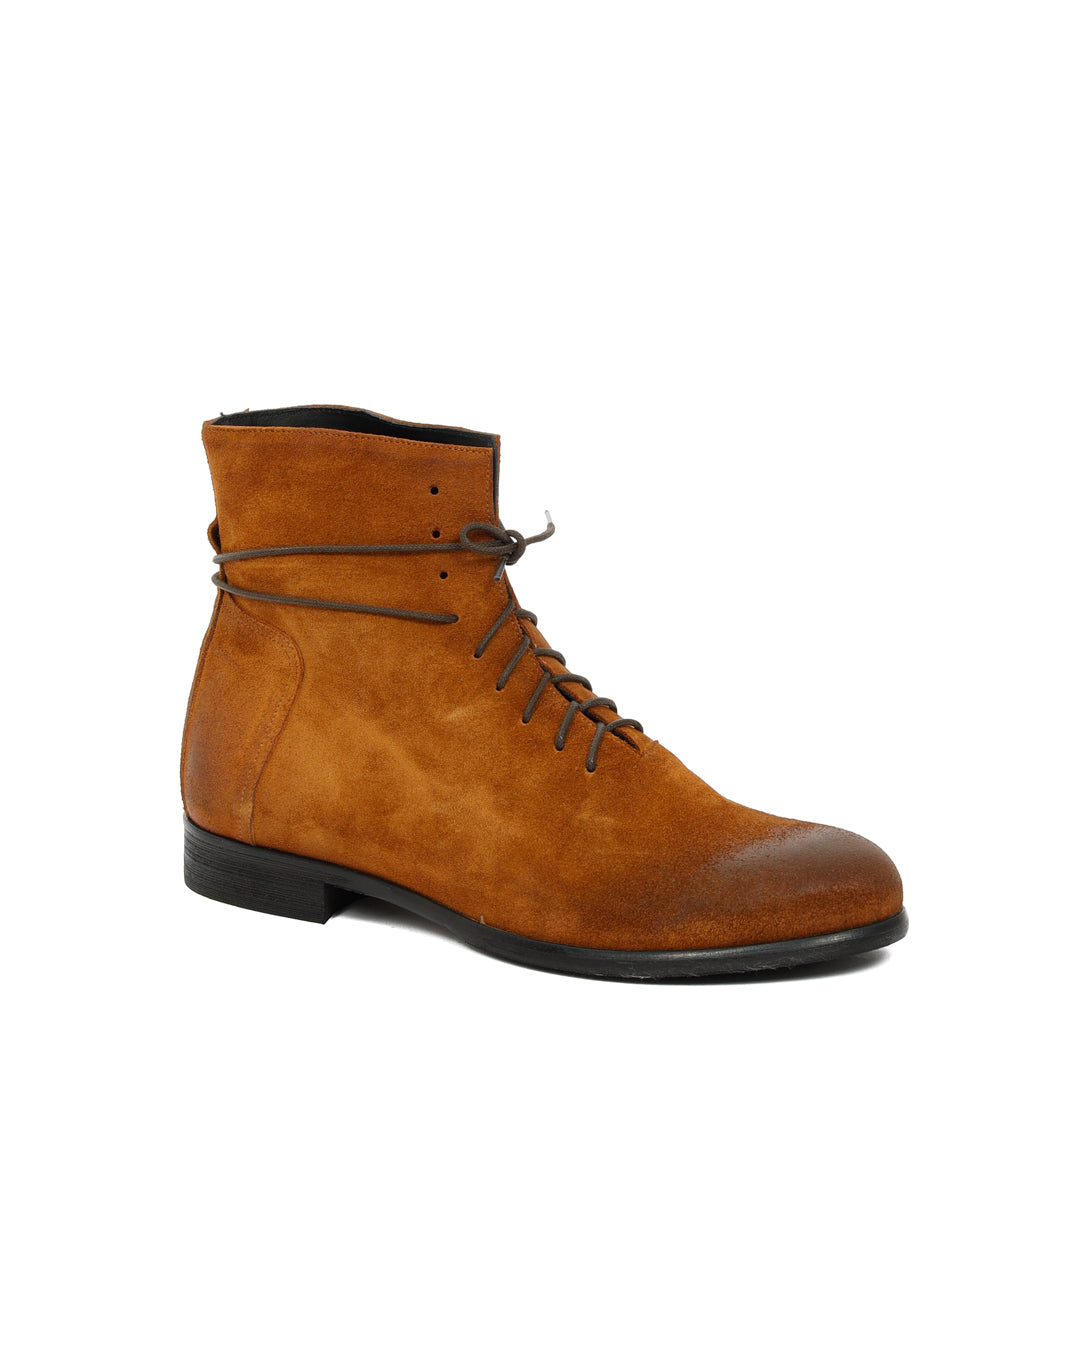 Houston - leather suede boot